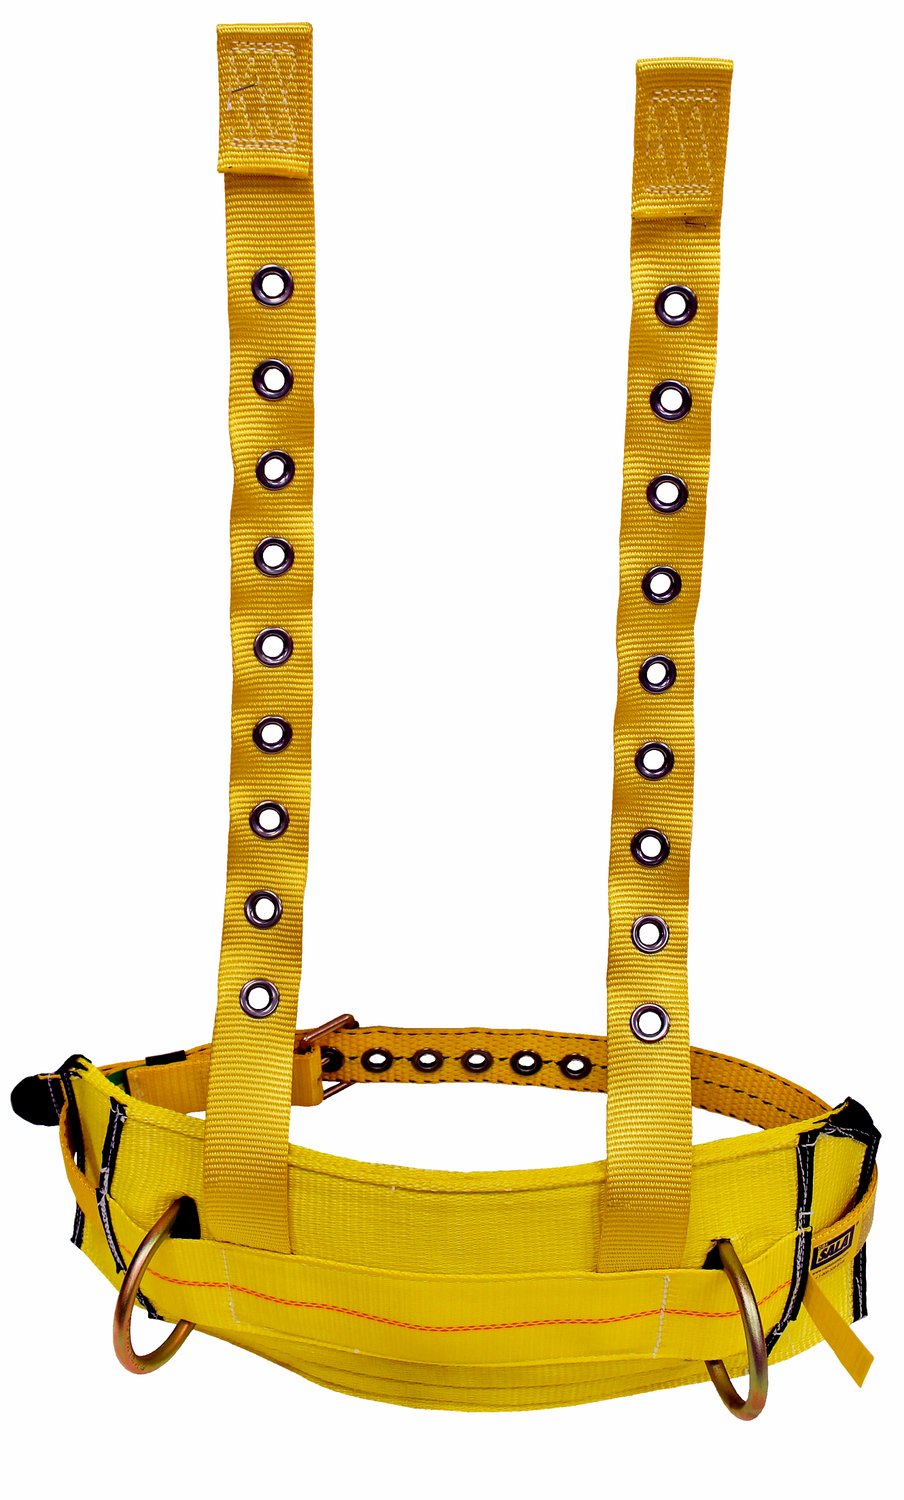 7012815135 - 3M DBI-SALA Derrick Tongue Buckle Positioning Belt with Tongue Buckle Harness Connector 1003230, Yellow, Small